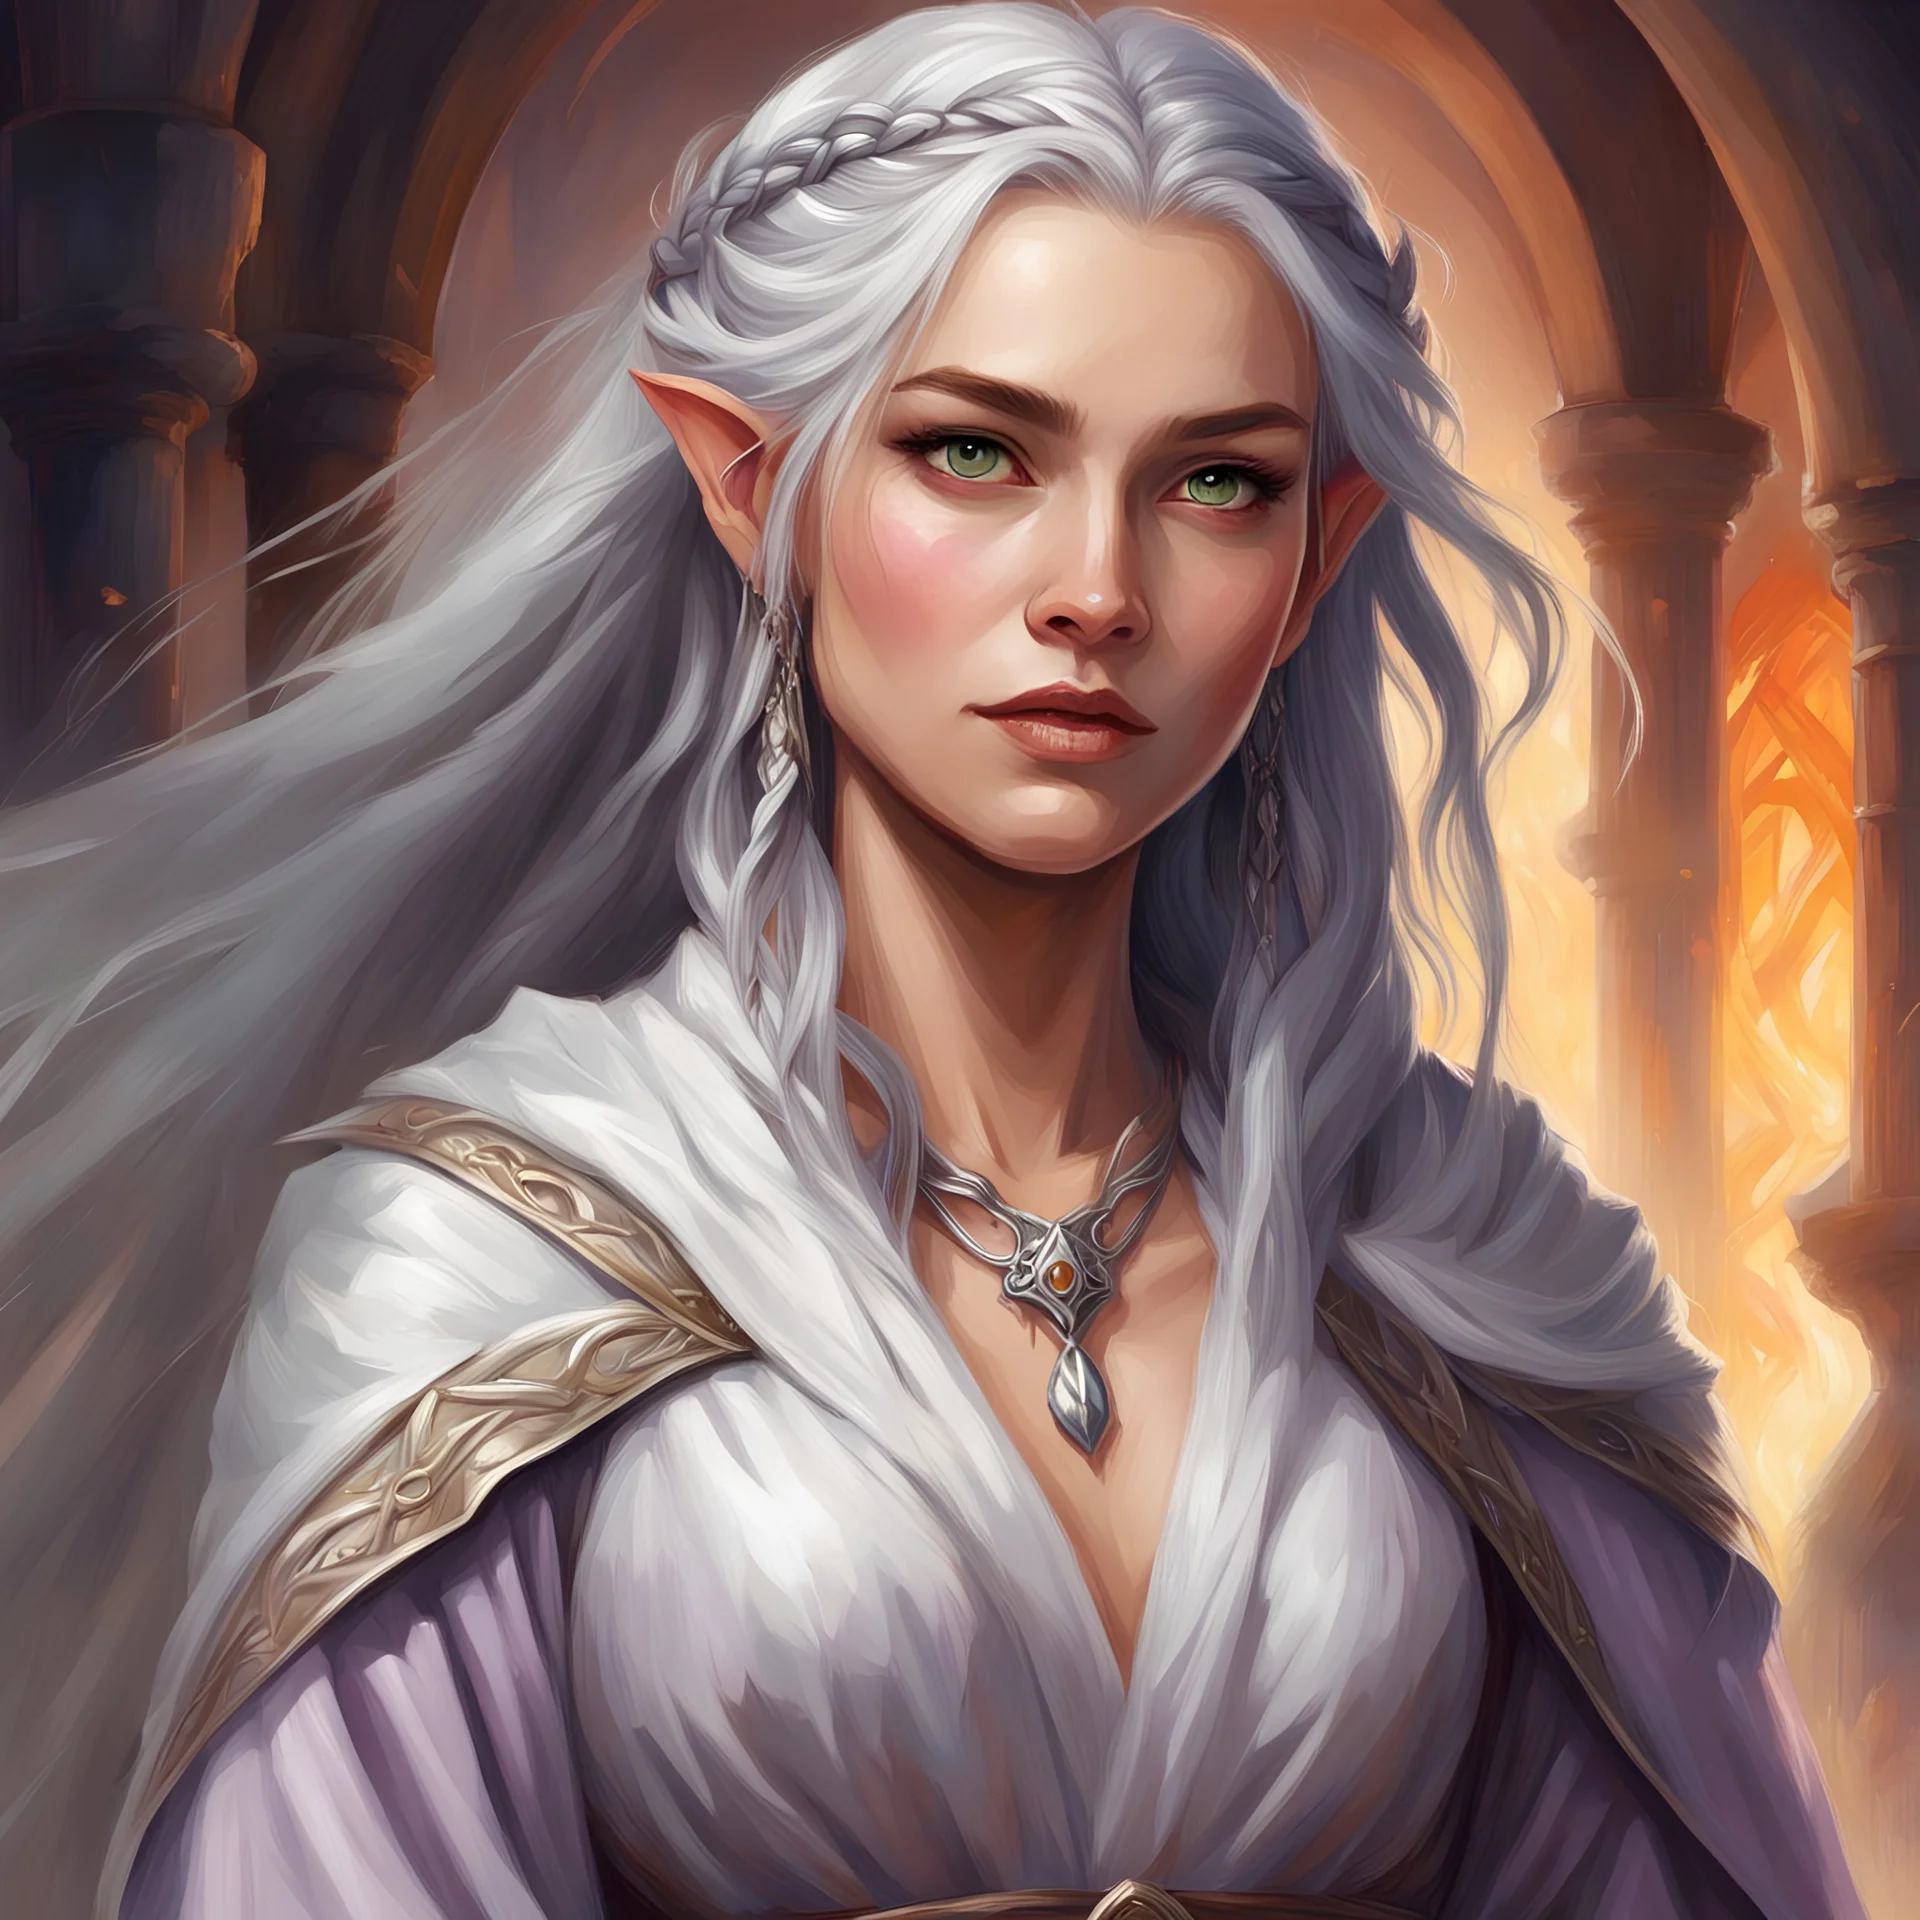 dungeons & dragons; fantasy; female; sorceress; silver eyes; silver hair; braids; young; long veil; teenager; pretty; half-elf; cute; welcoming; confident; elegant clothes; warm colored clothes; flowing robes; traveling; cloak; portrait; oil painting